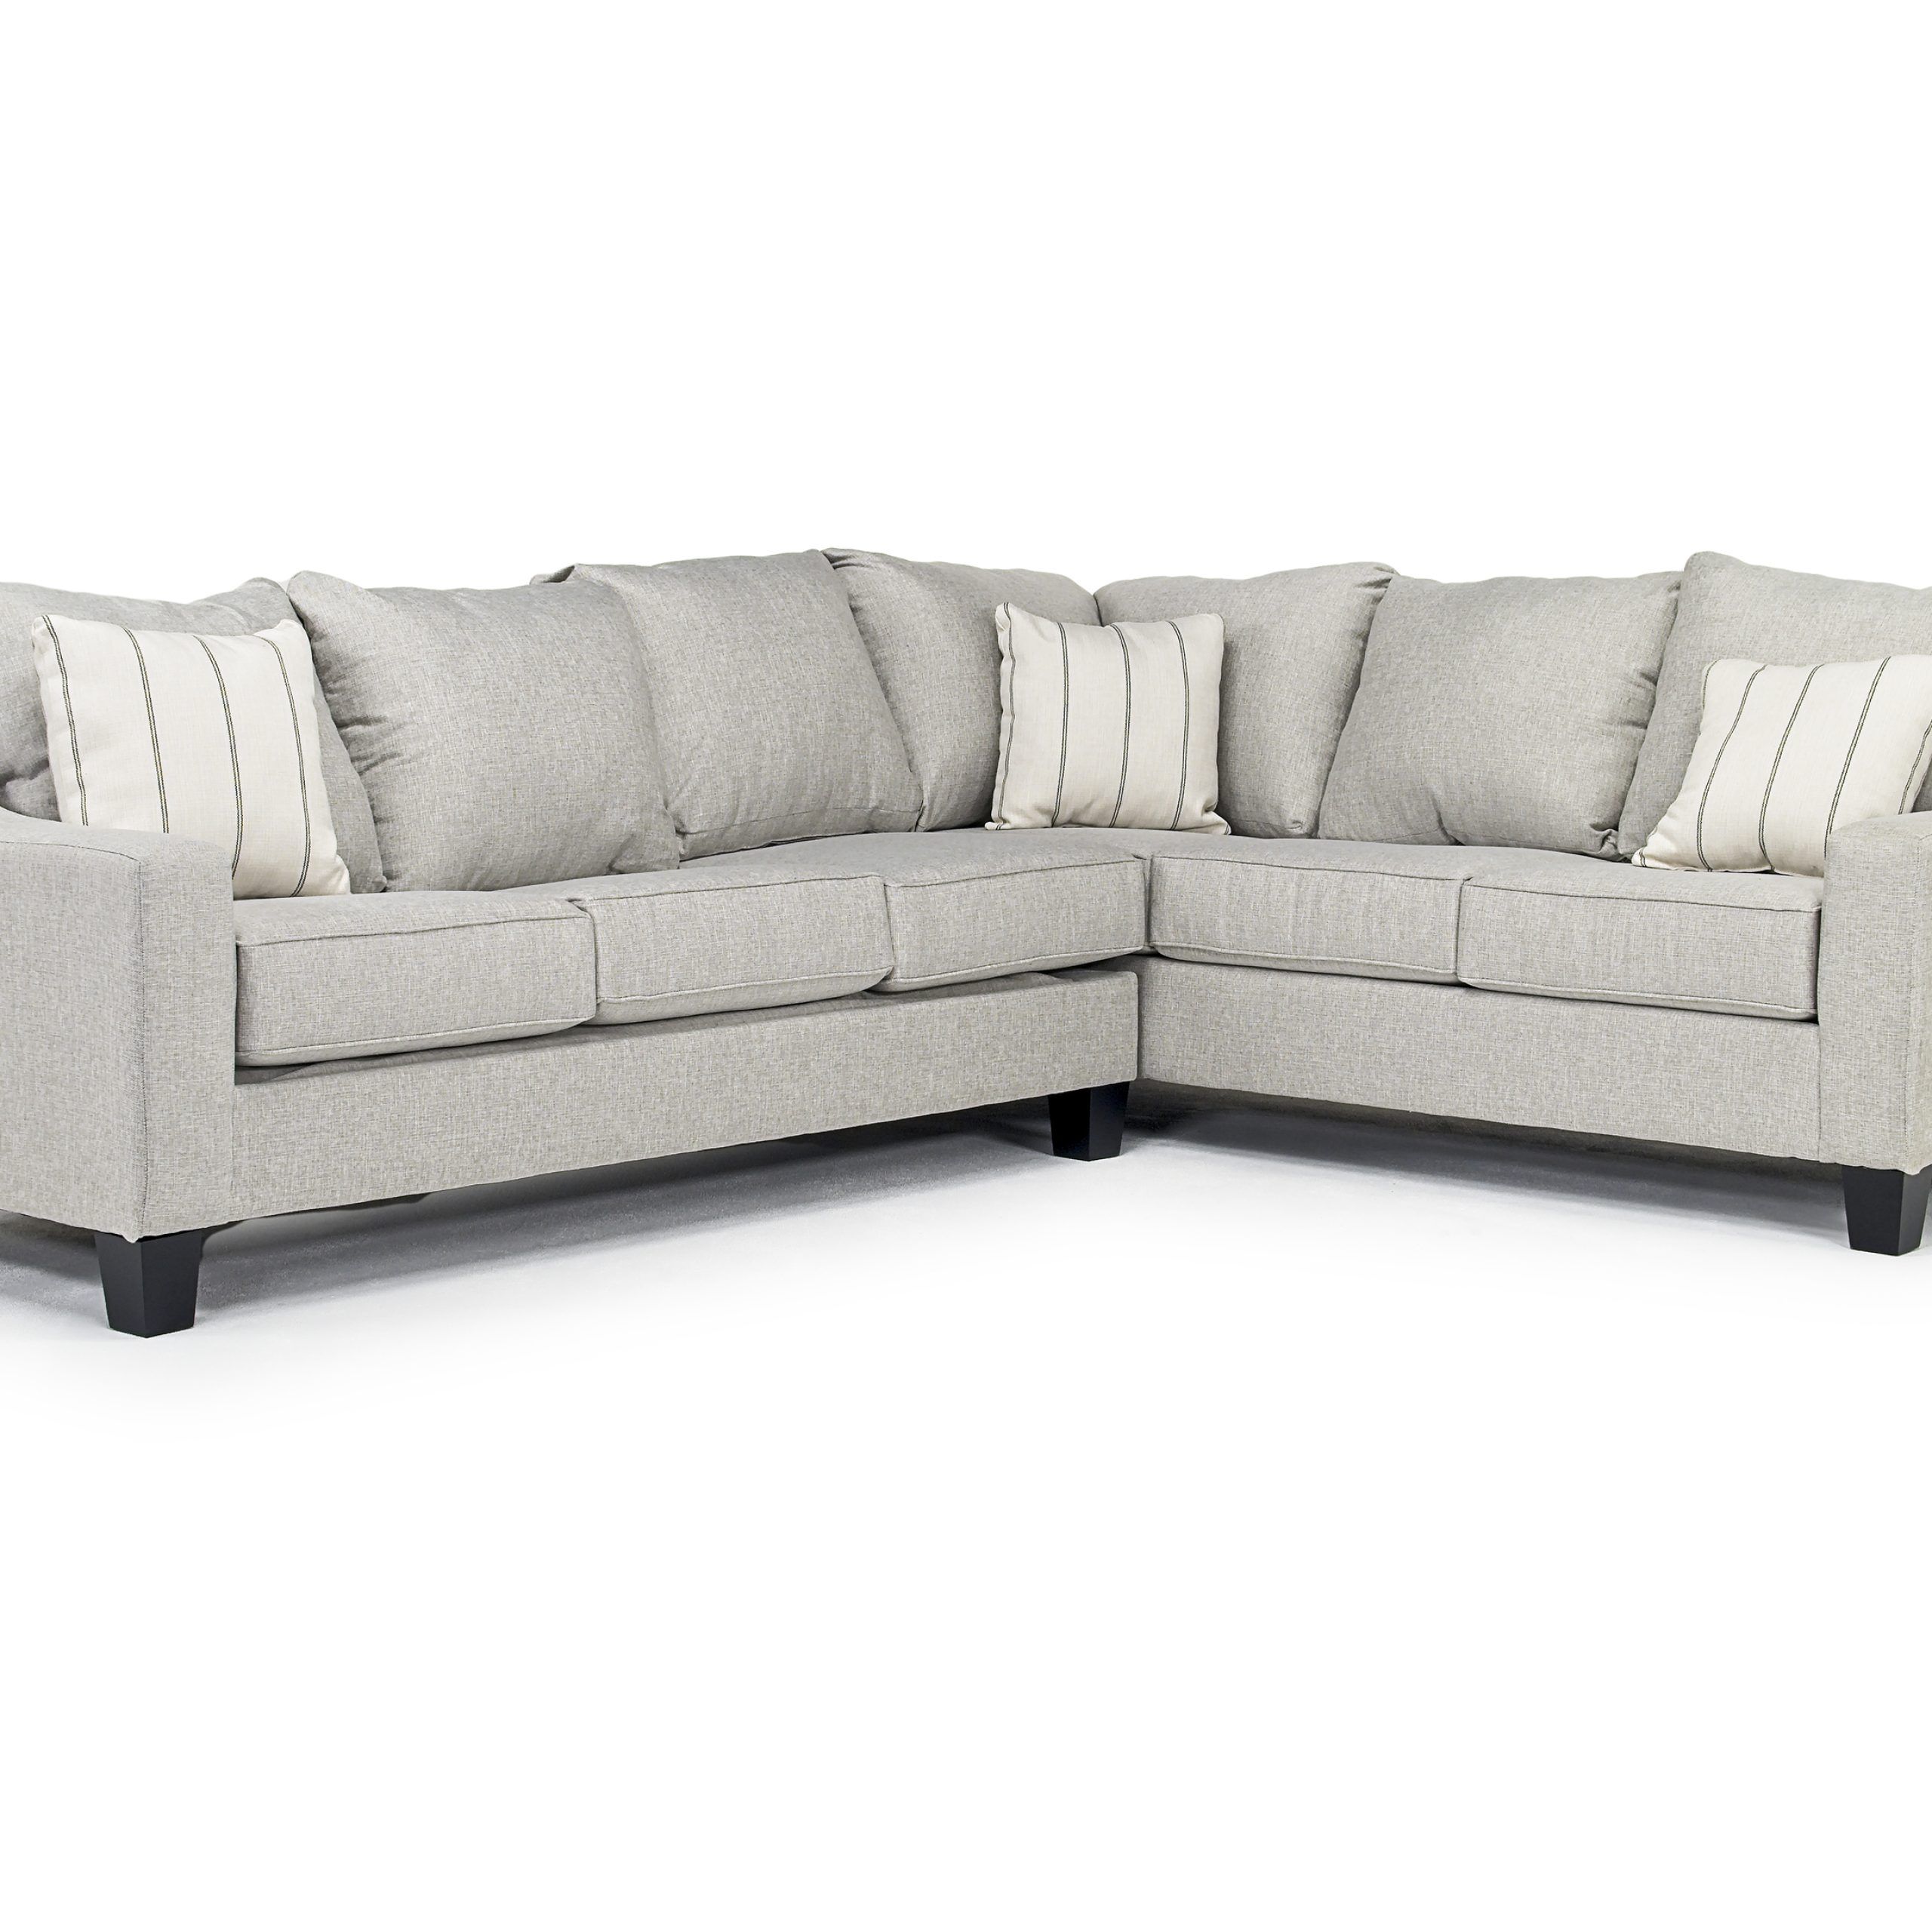 Lucy Tux Queen Sleeper Sectional In Splash Linen, Left Facing Throughout Left Or Right Facing Sleeper Sectionals (View 4 of 15)